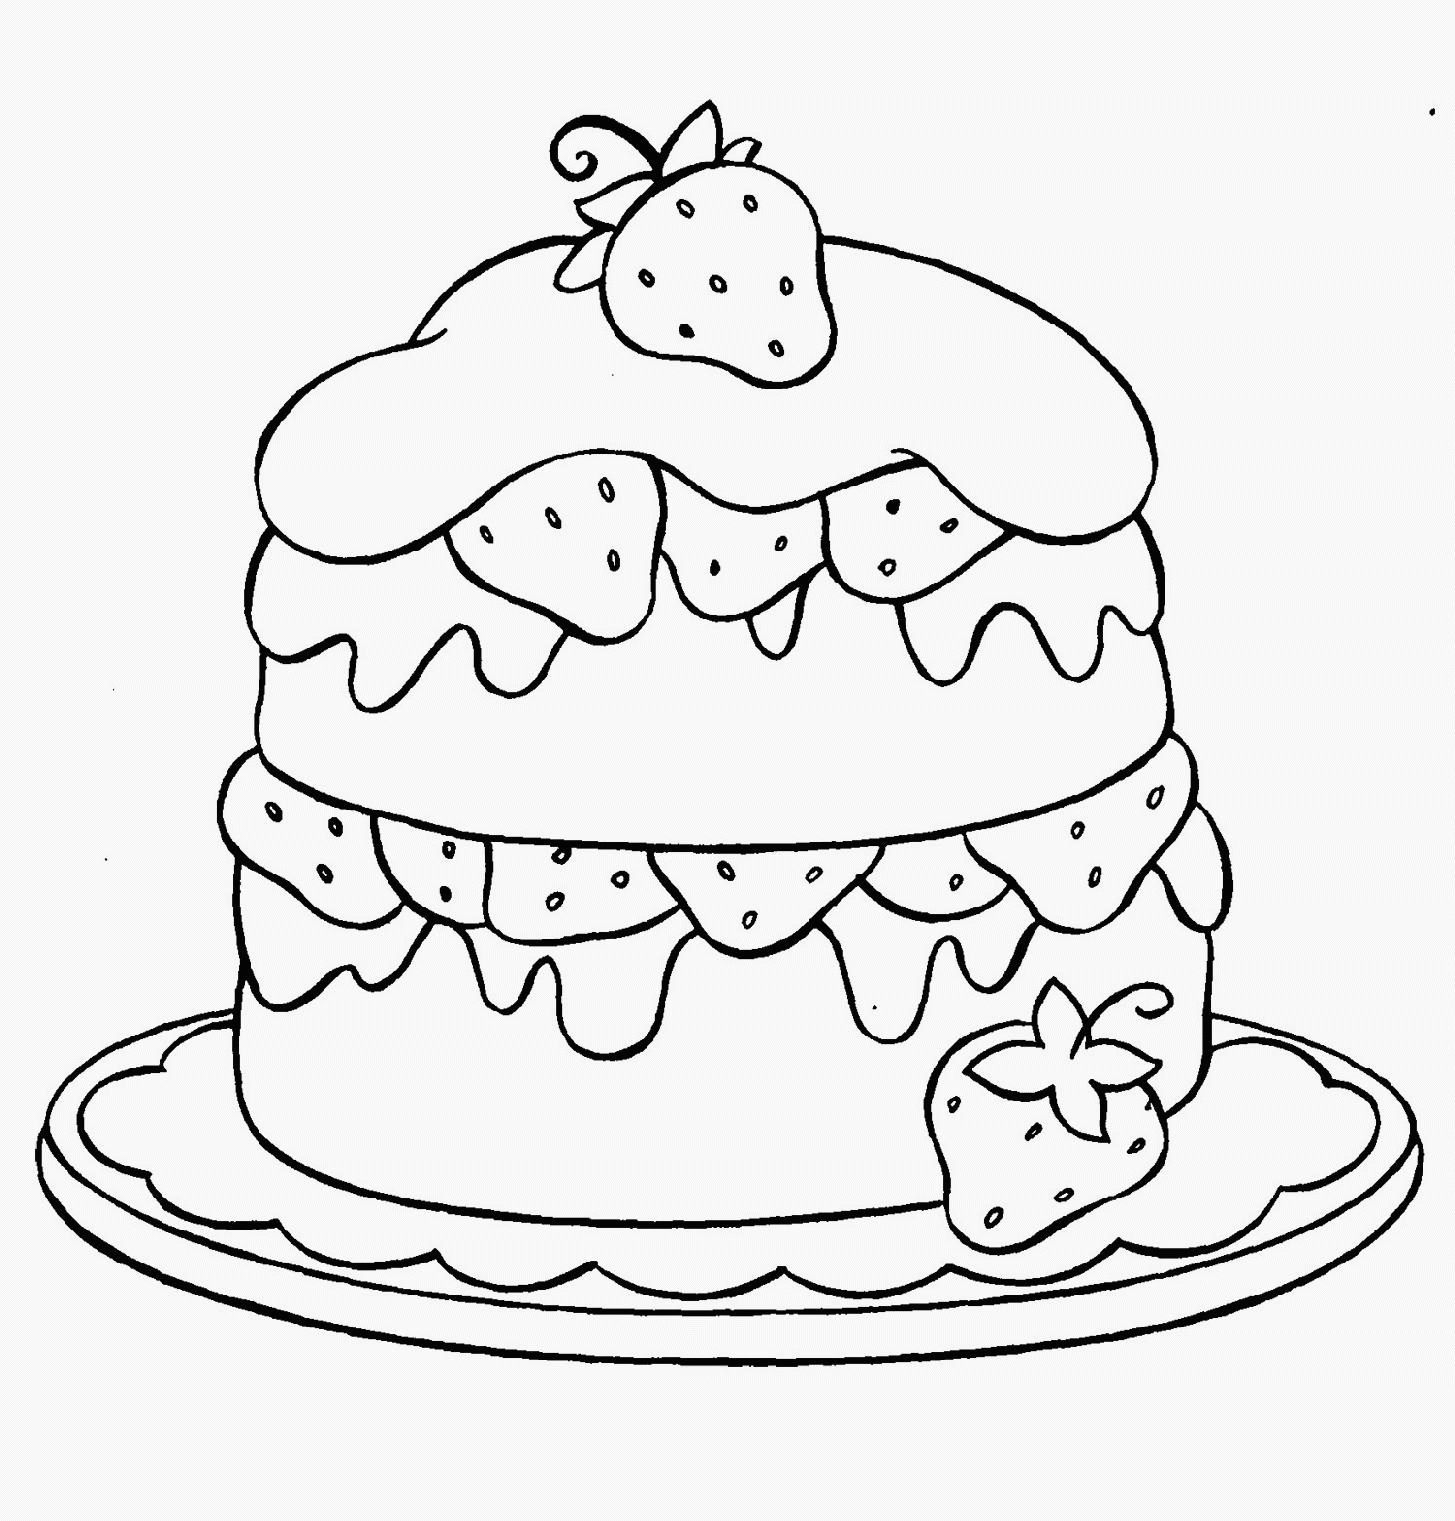 Cupcake Printable Coloring Pages - Coloring Home